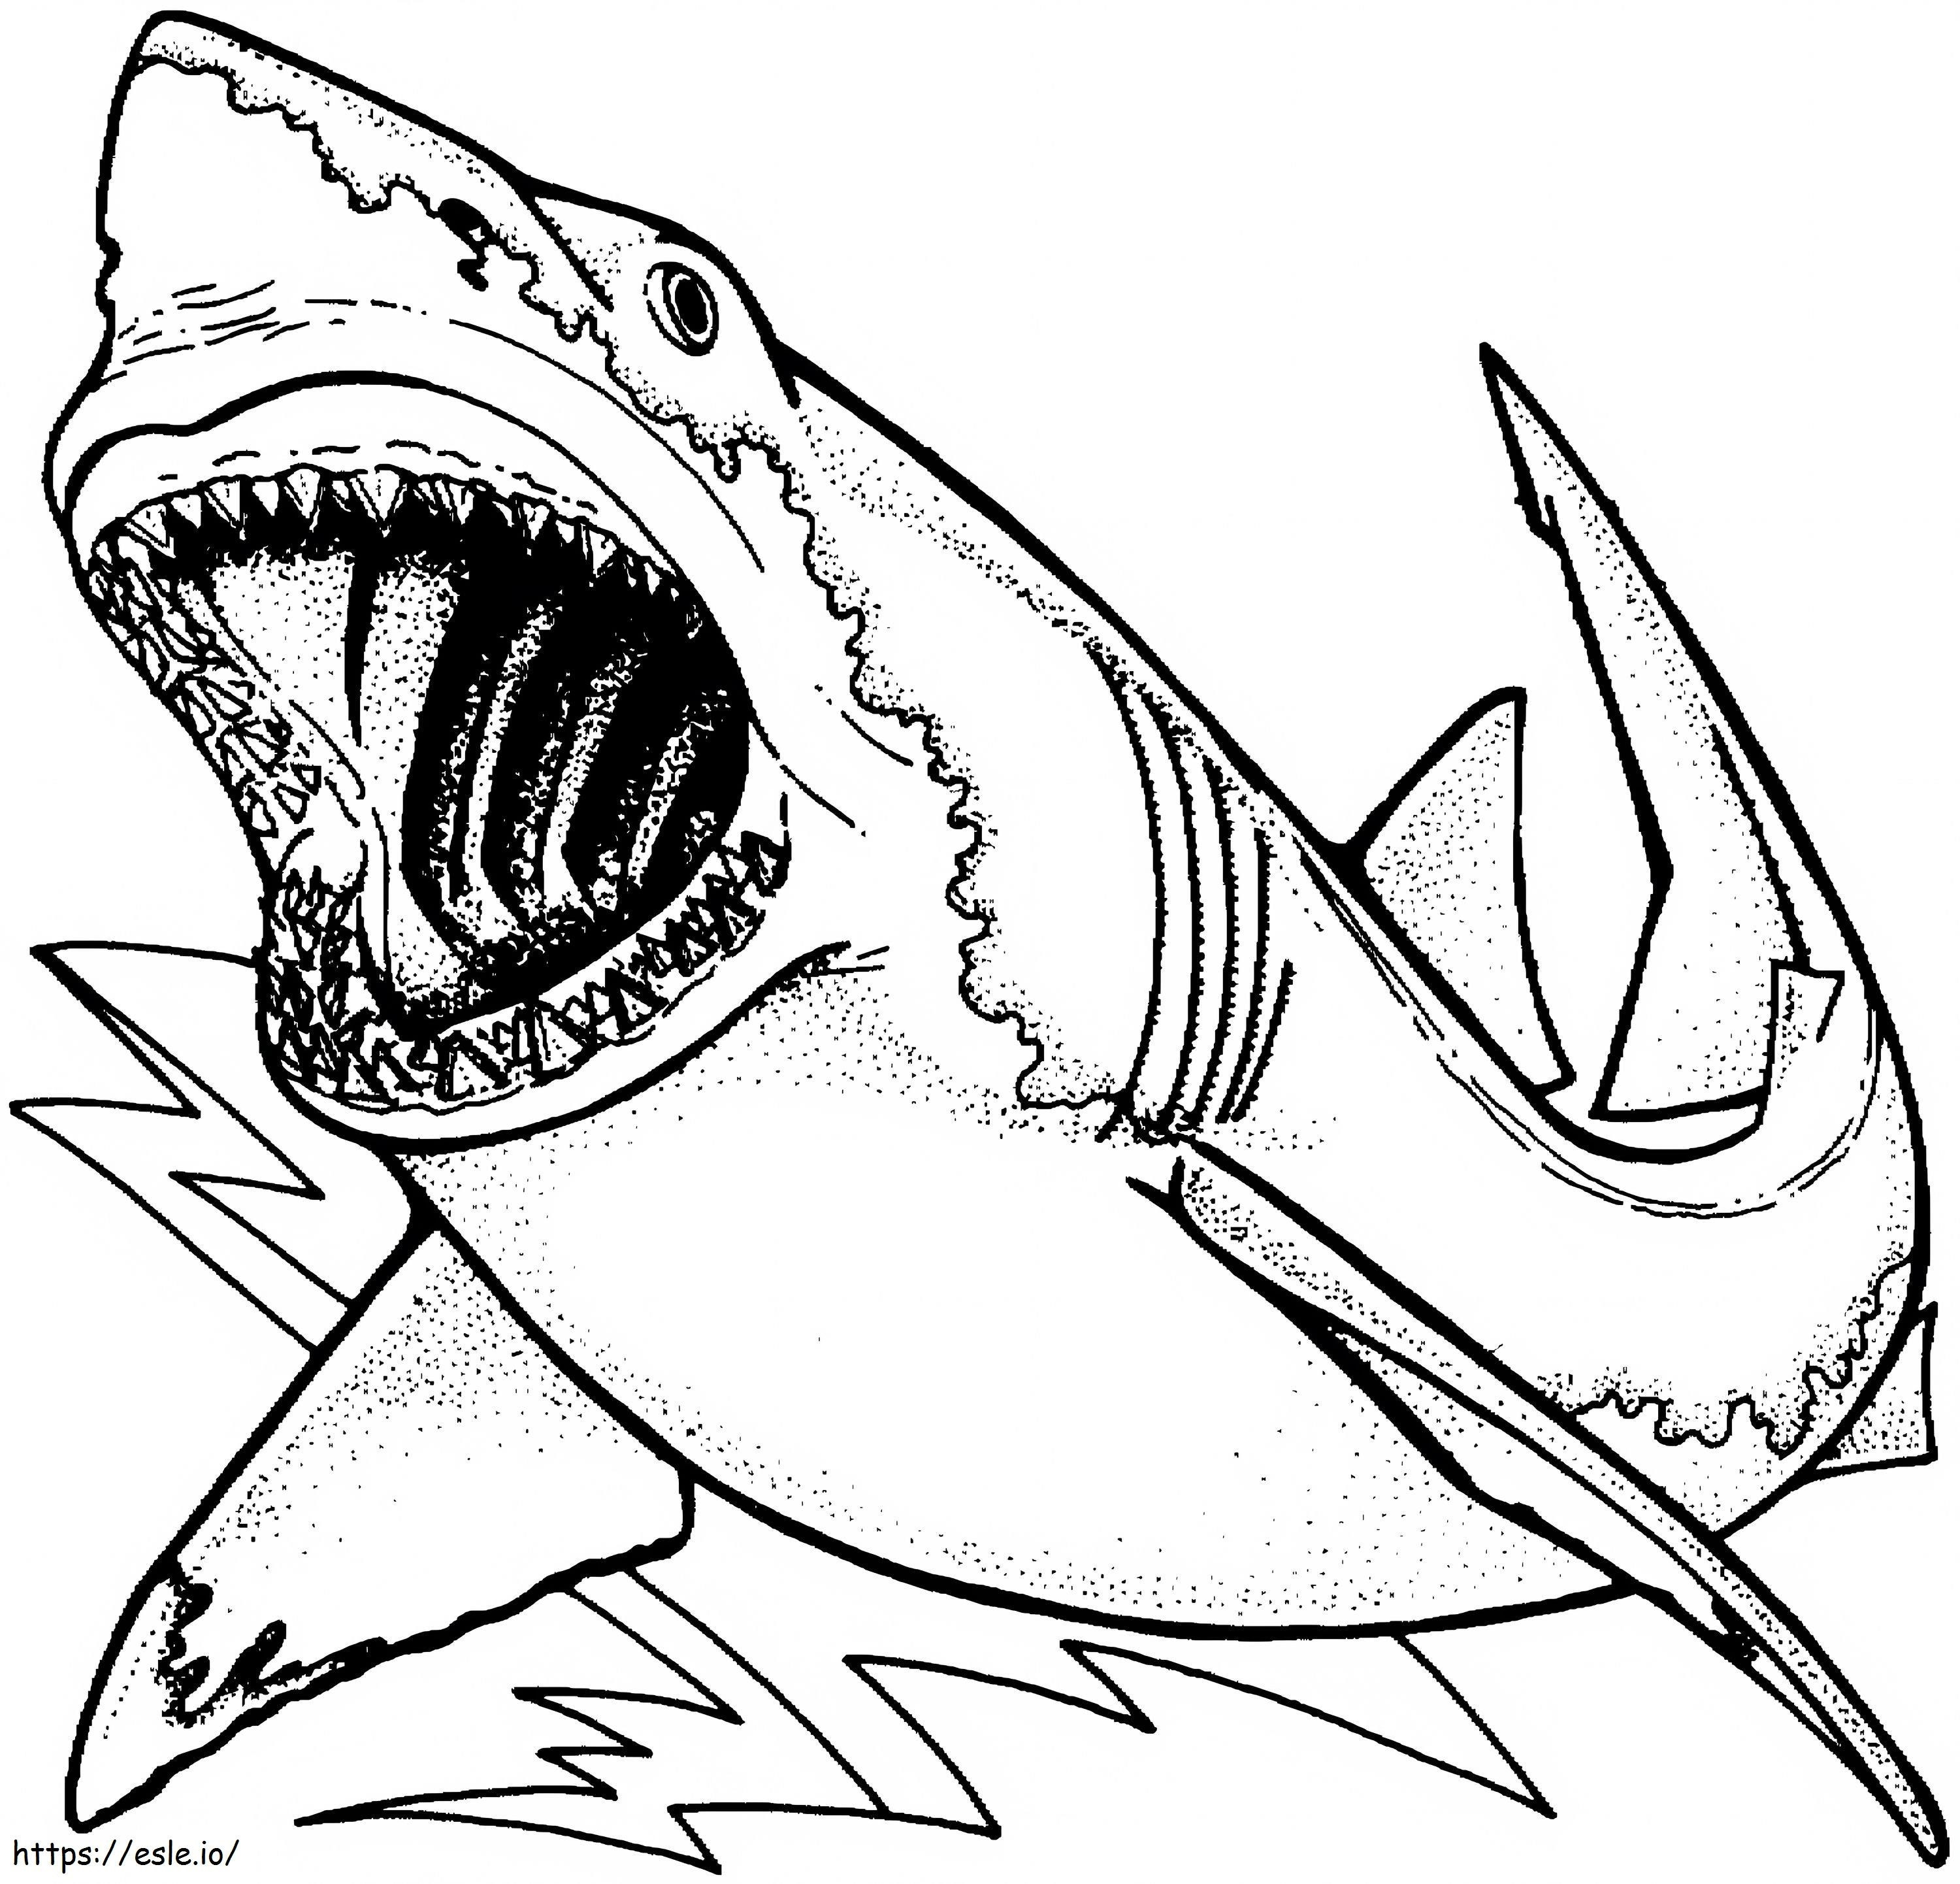  Cool For Boys New Promise Shark Coloring Page Unique Whale Of And Adults da colorare